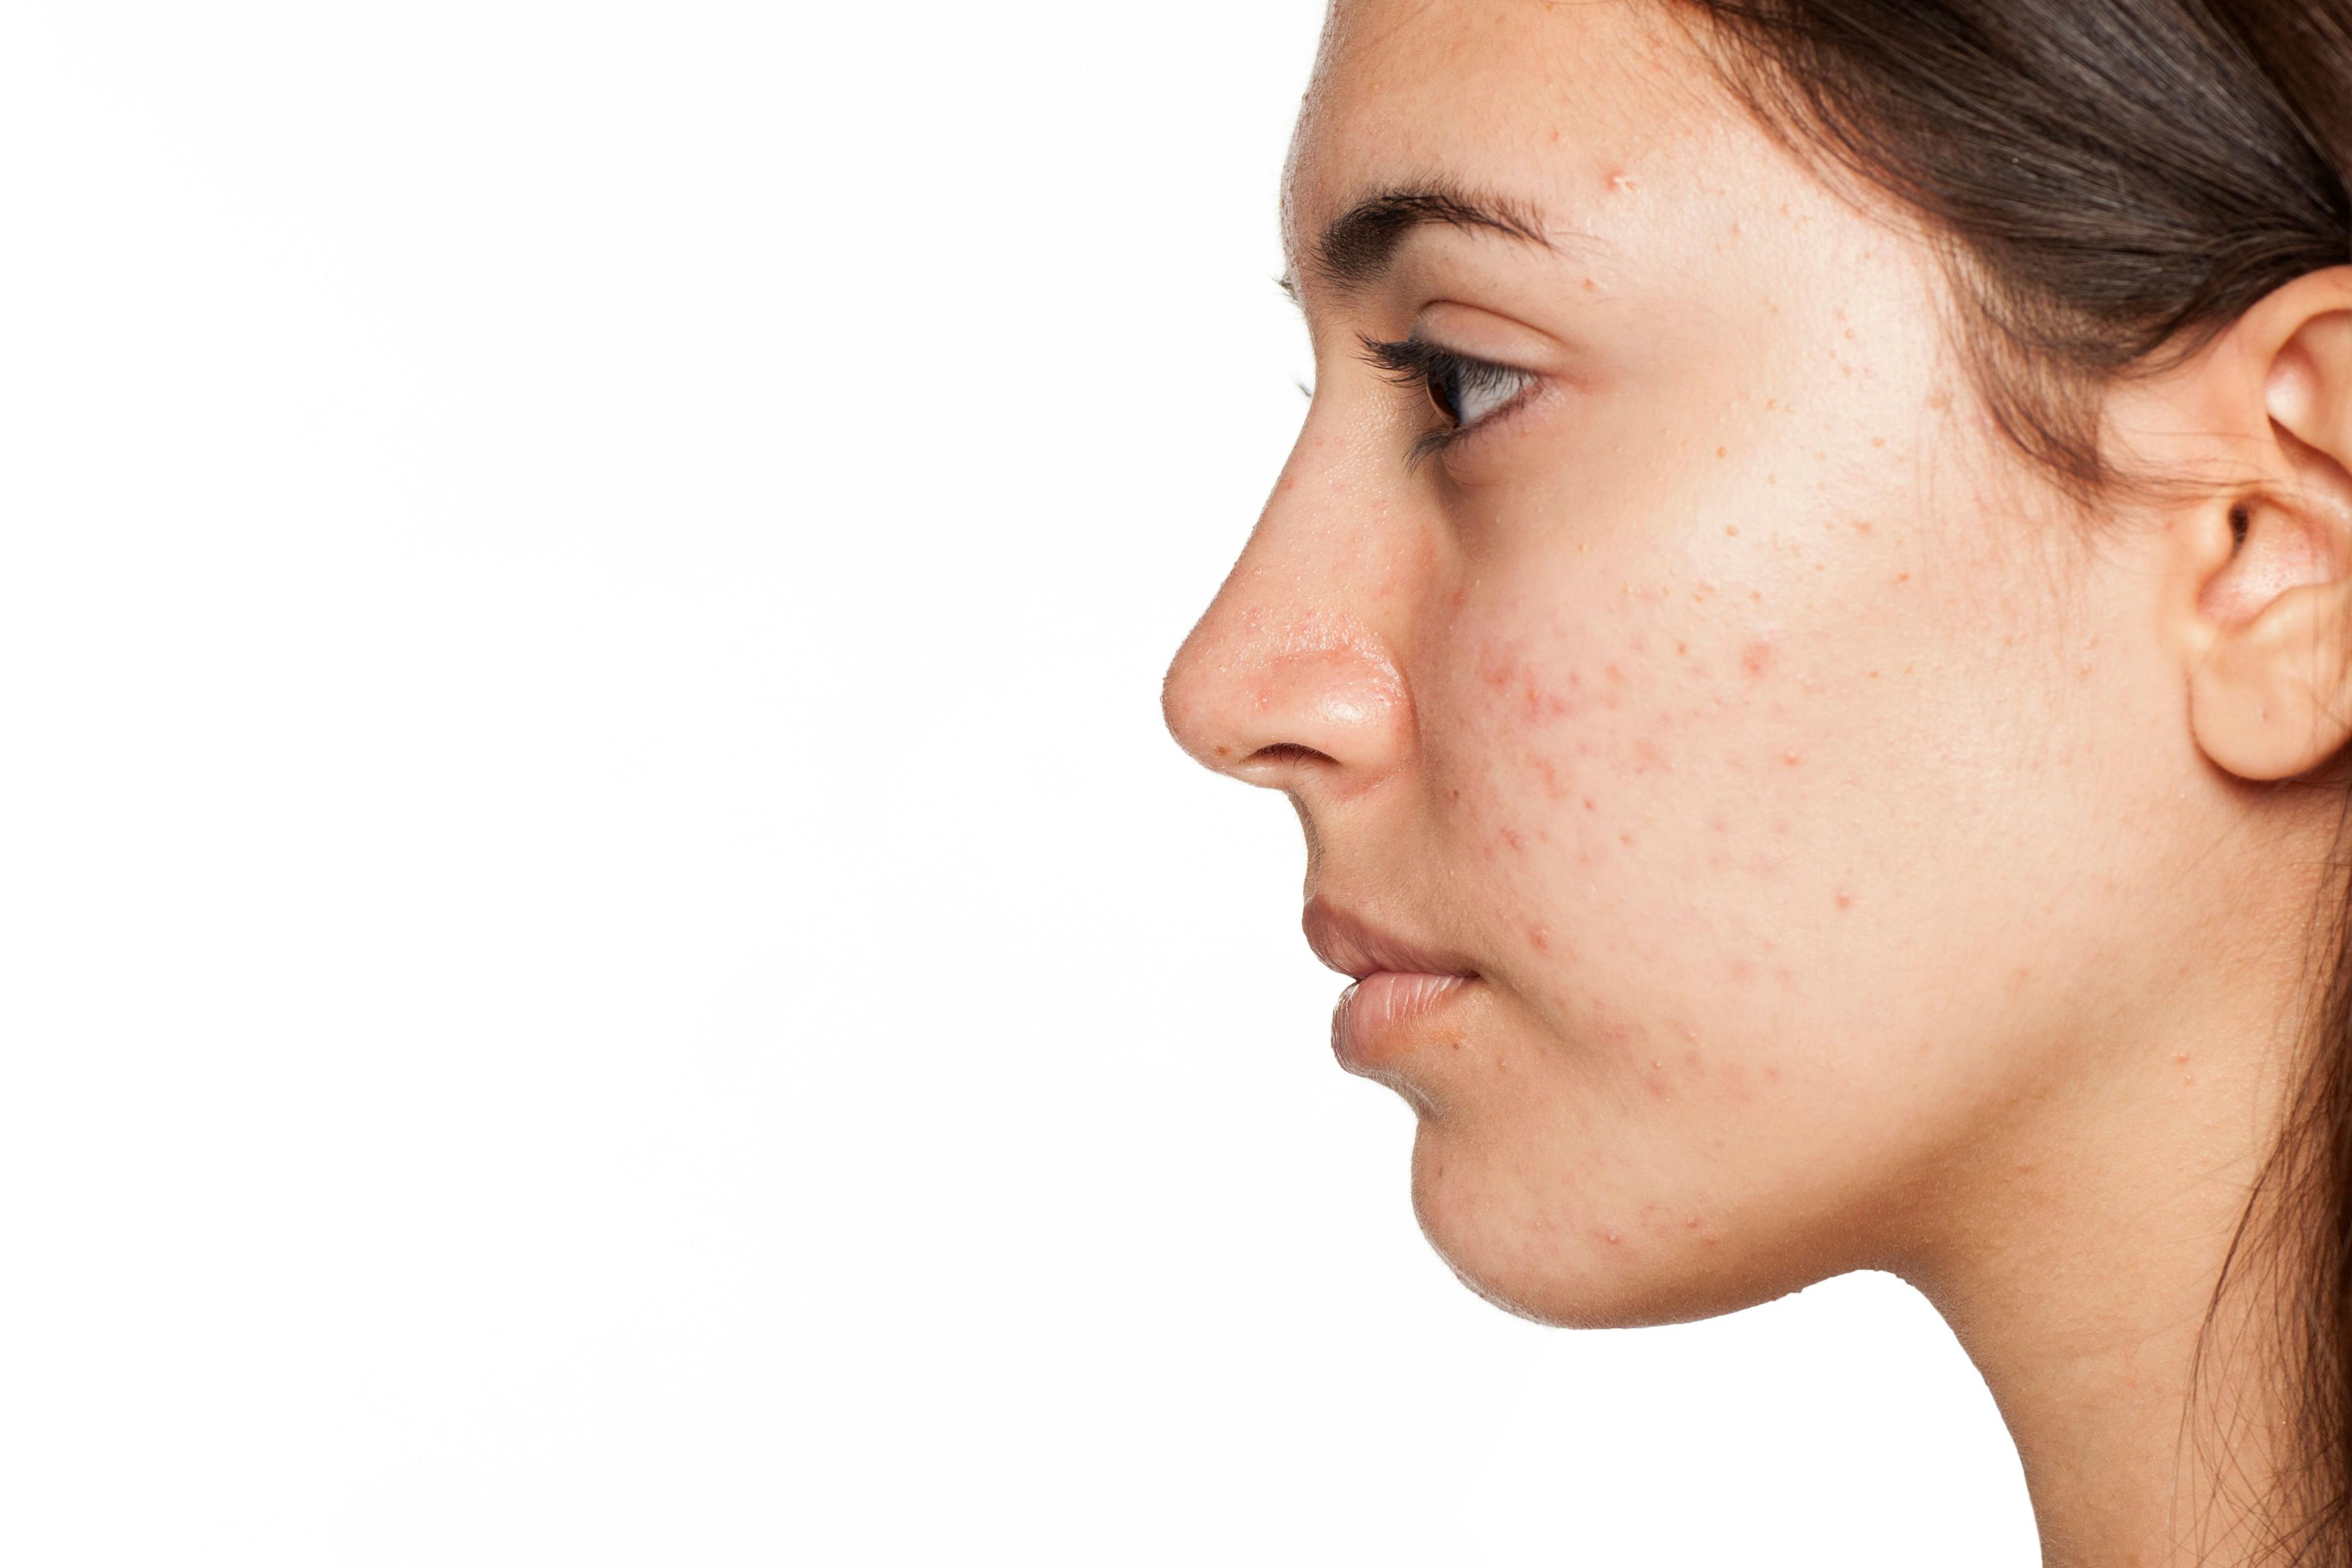 Clear It Up Like a Derm Campaign Educates Consumers on Acne